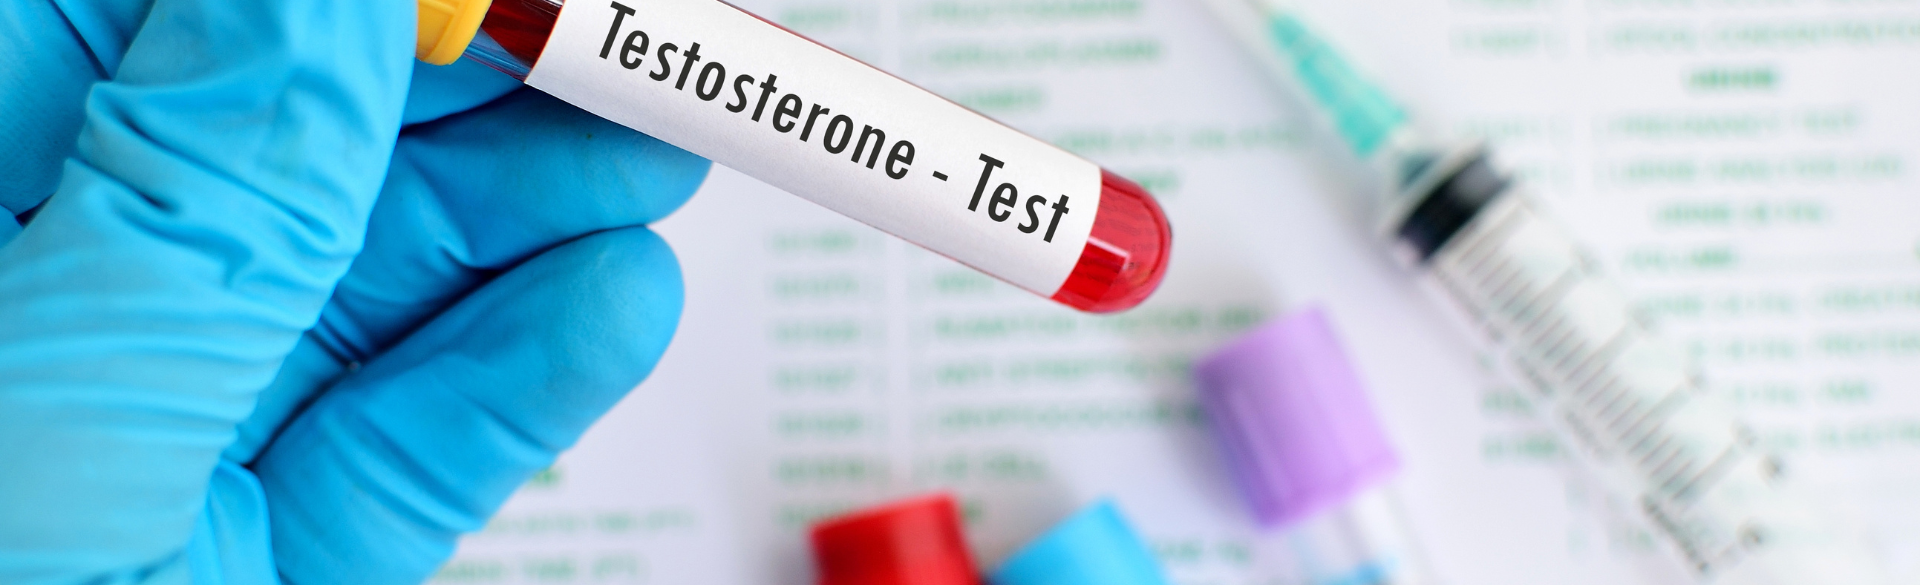 In recognition of Men's Health Week, June 13–19, we spoke with John Dodge, PA, about testosterone and related effects on mental and physical health.